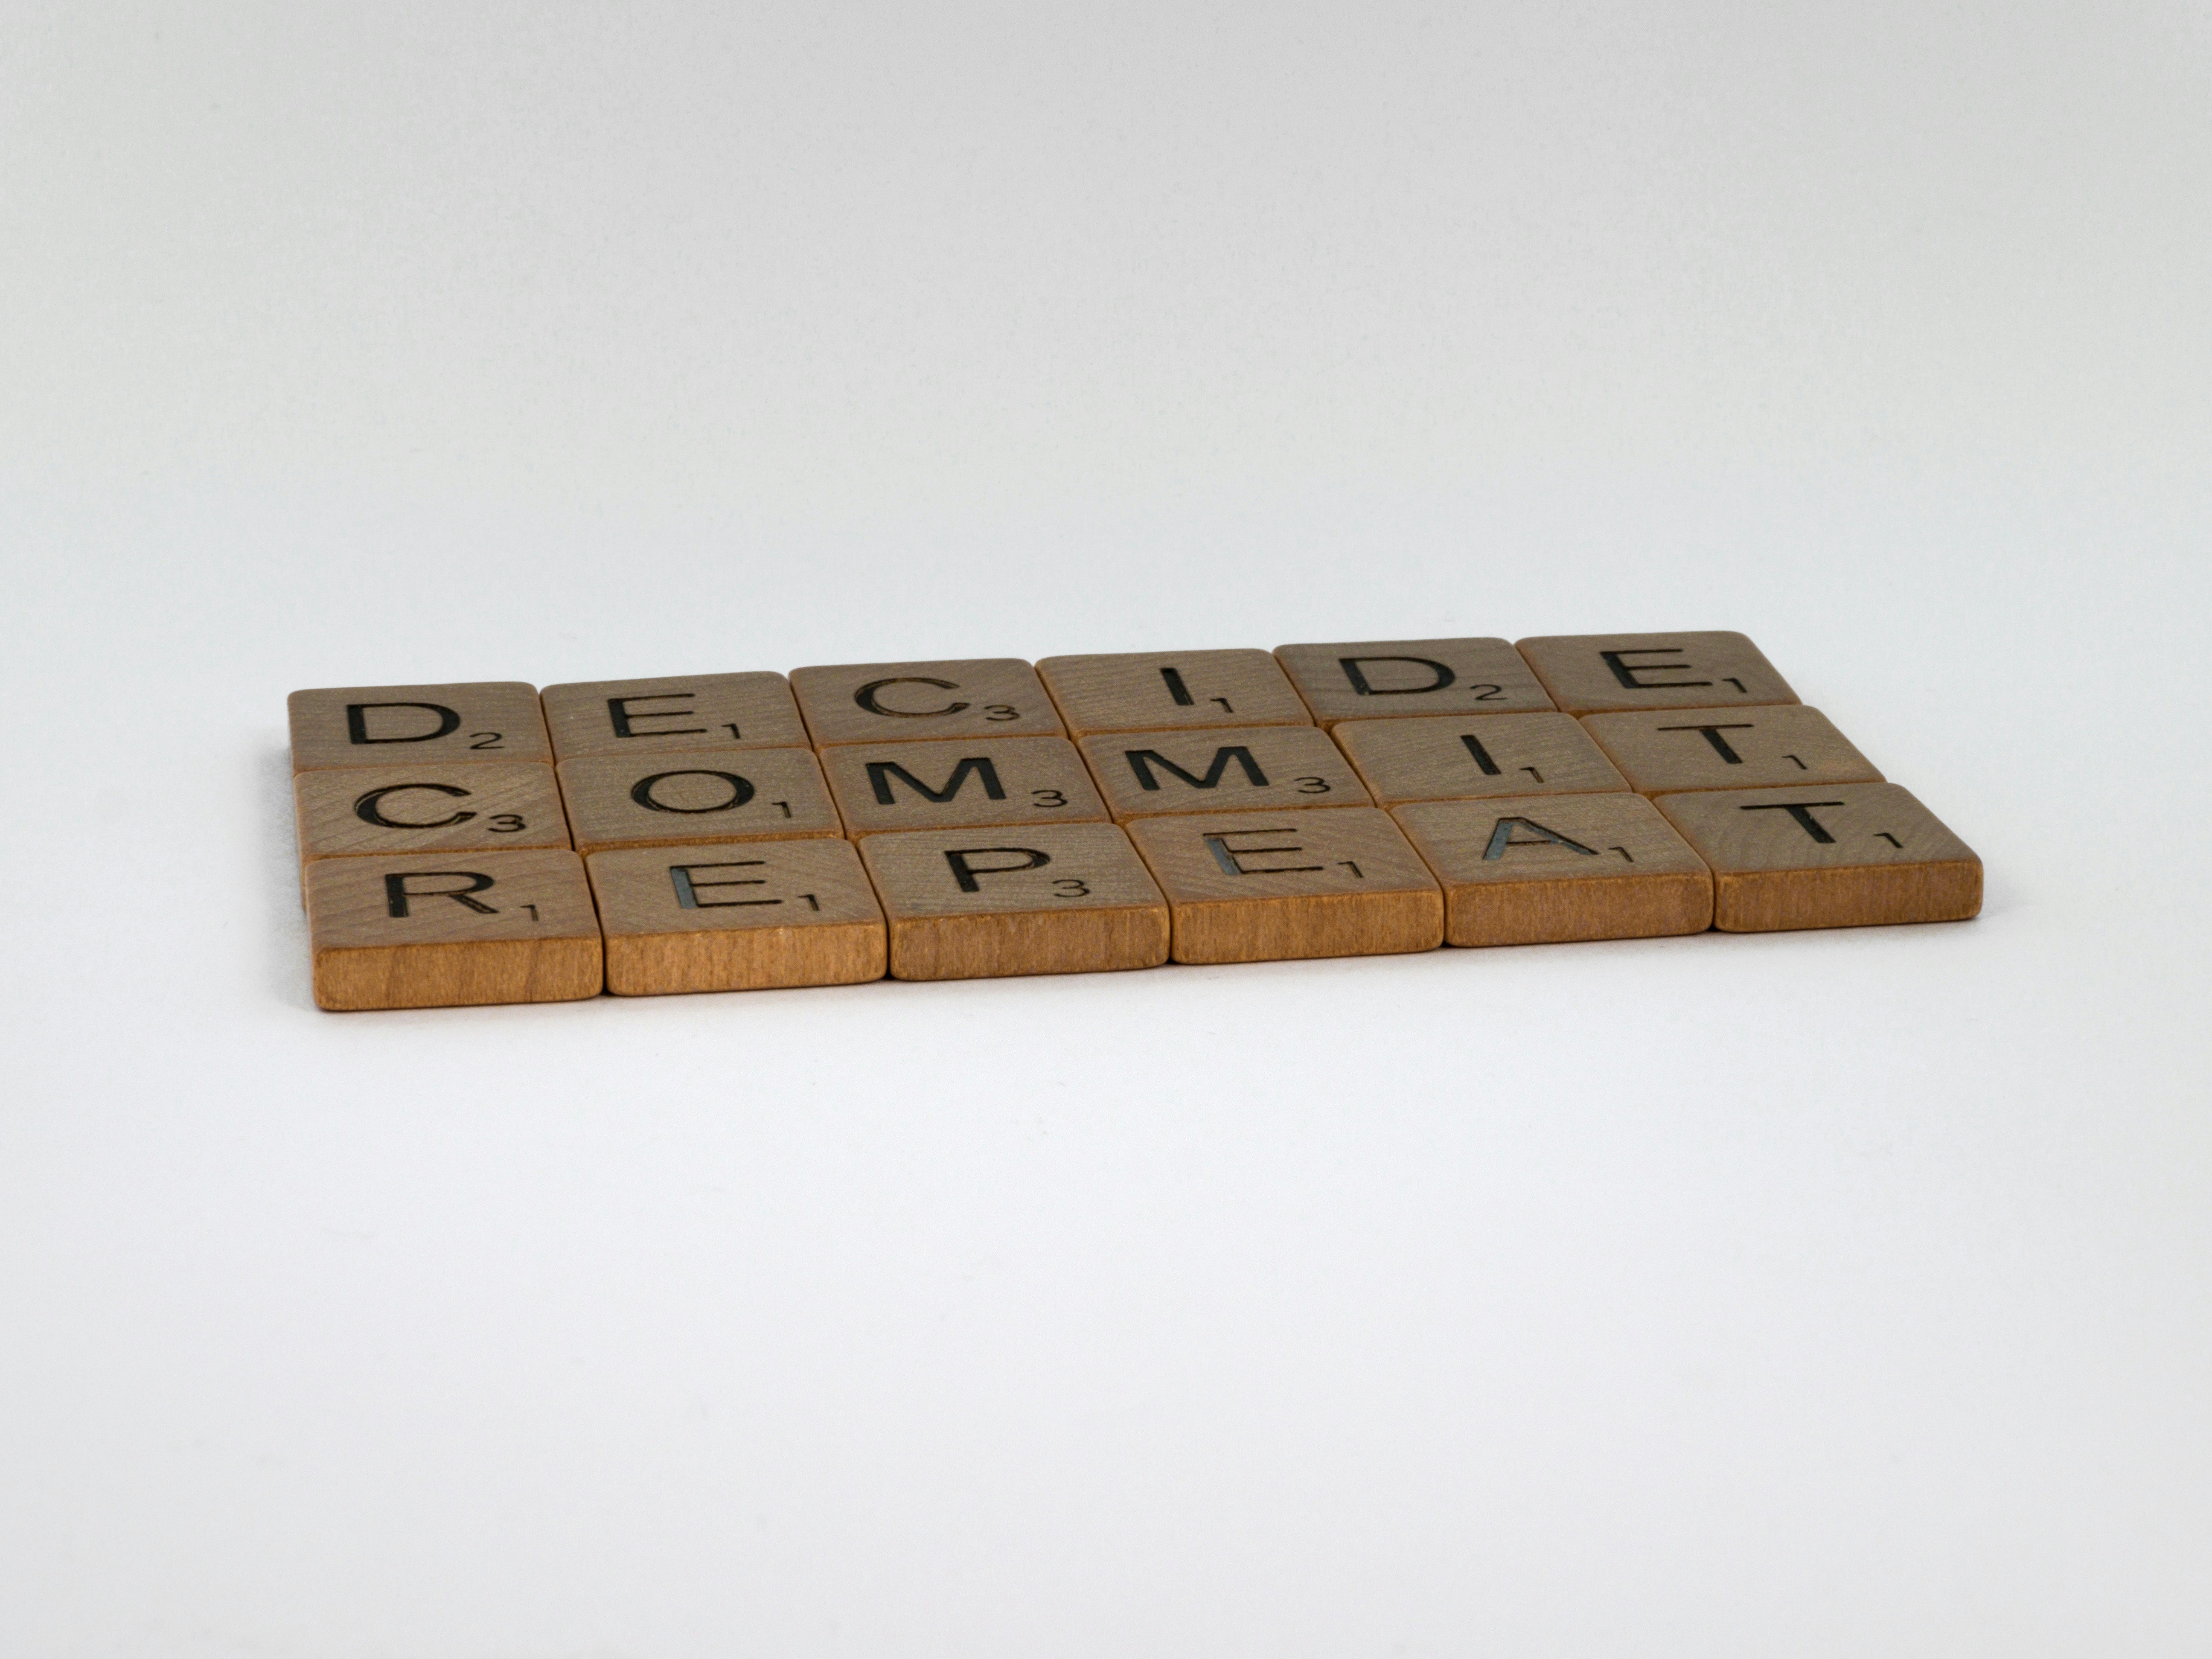 scrabble, scrabble pieces, lettering, letters, wood, scrabble tiles, white background, words, quote, letters, type, typography, design, layout, focus, bokeh, blur, photography, images, image, decide commit repeat, discipline, relentless, training, decisions, action, plan, dream, life, real life, progress, make progress, mindfulness, seize the day, carpe diem, live live, live life to the full, 